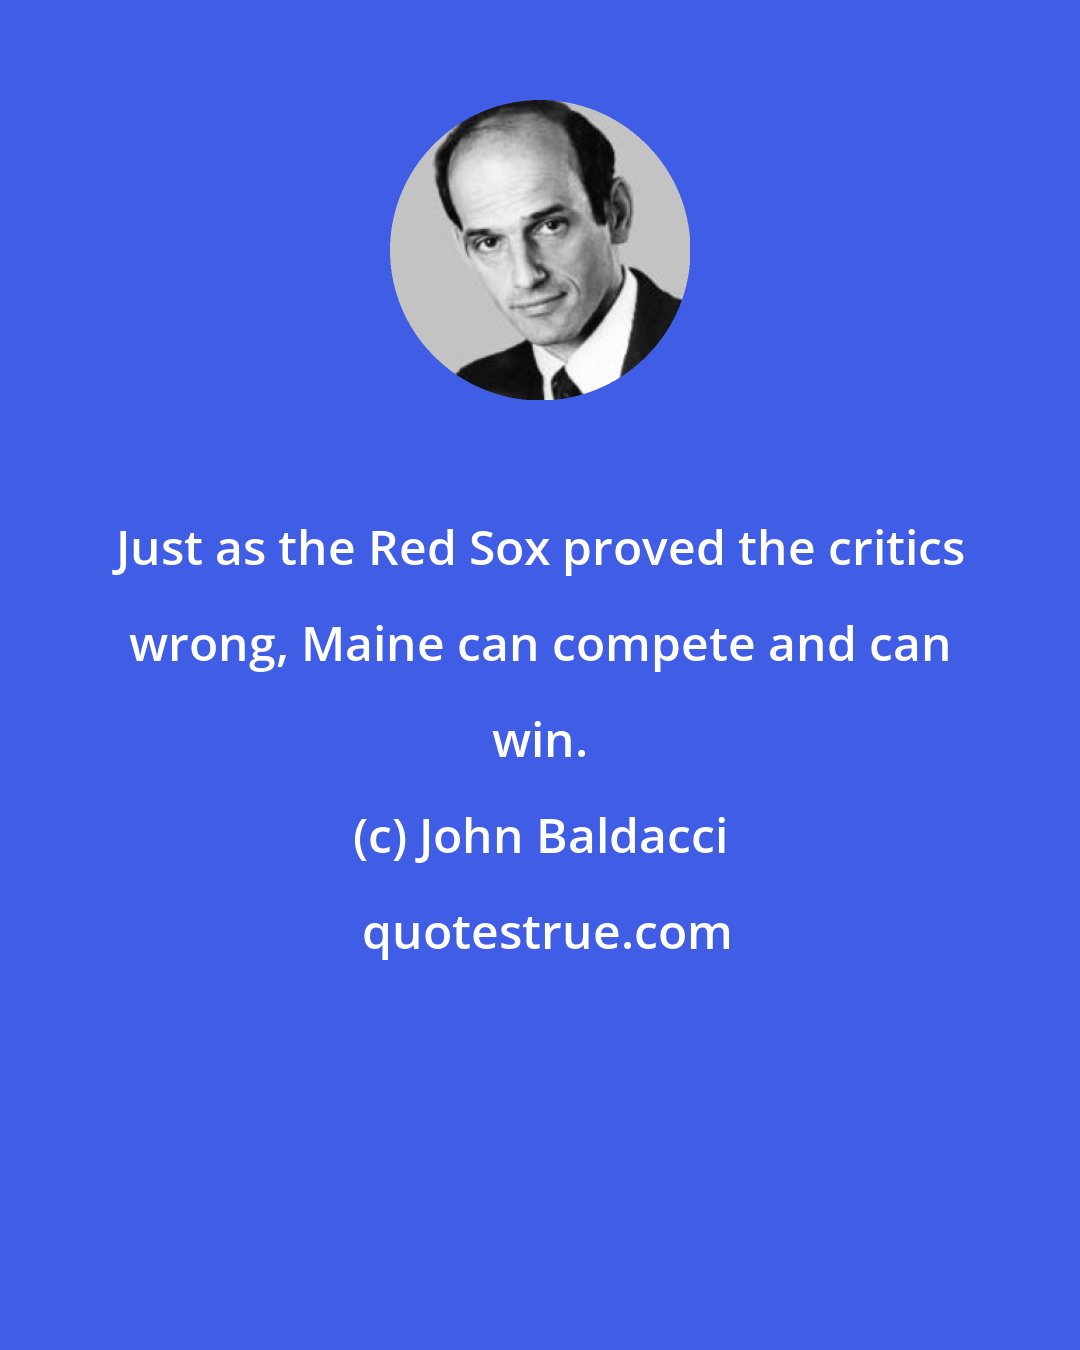 John Baldacci: Just as the Red Sox proved the critics wrong, Maine can compete and can win.